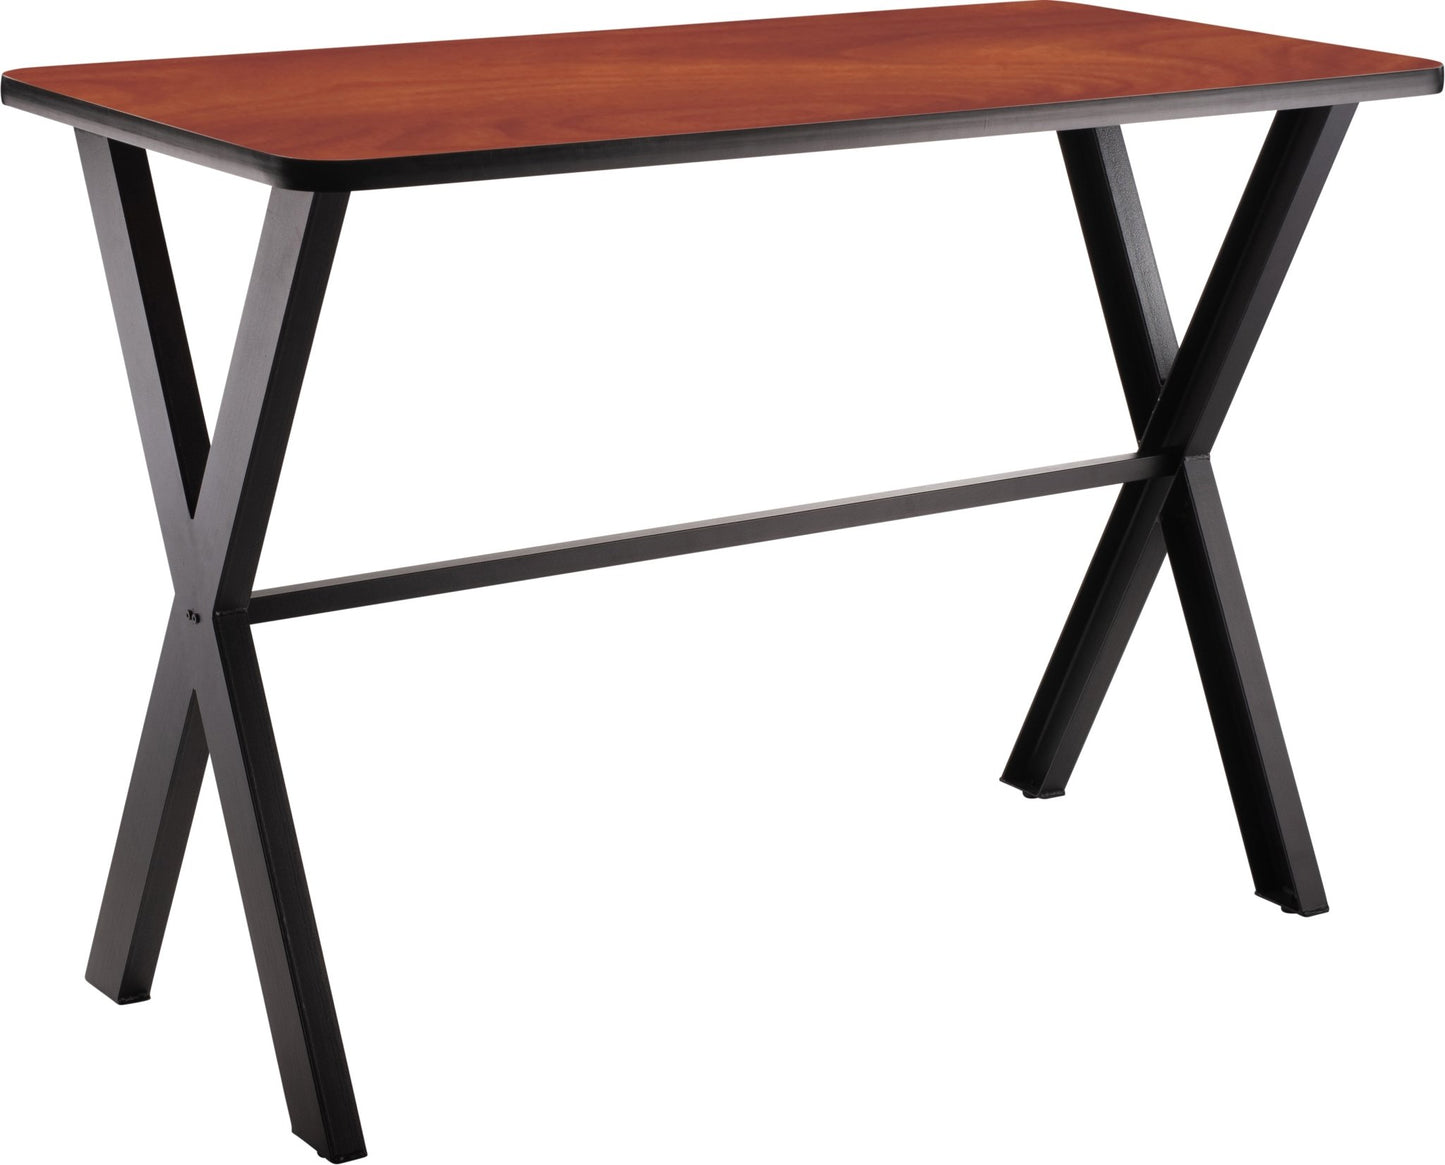 NPS CLT3060B2 - Collaborator Table, 30"x 60" Rectangle, 42" Height w/ Crossbeam, High Pressure Laminate Top (National Public Seating NPS-CLT3060B2) - SchoolOutlet